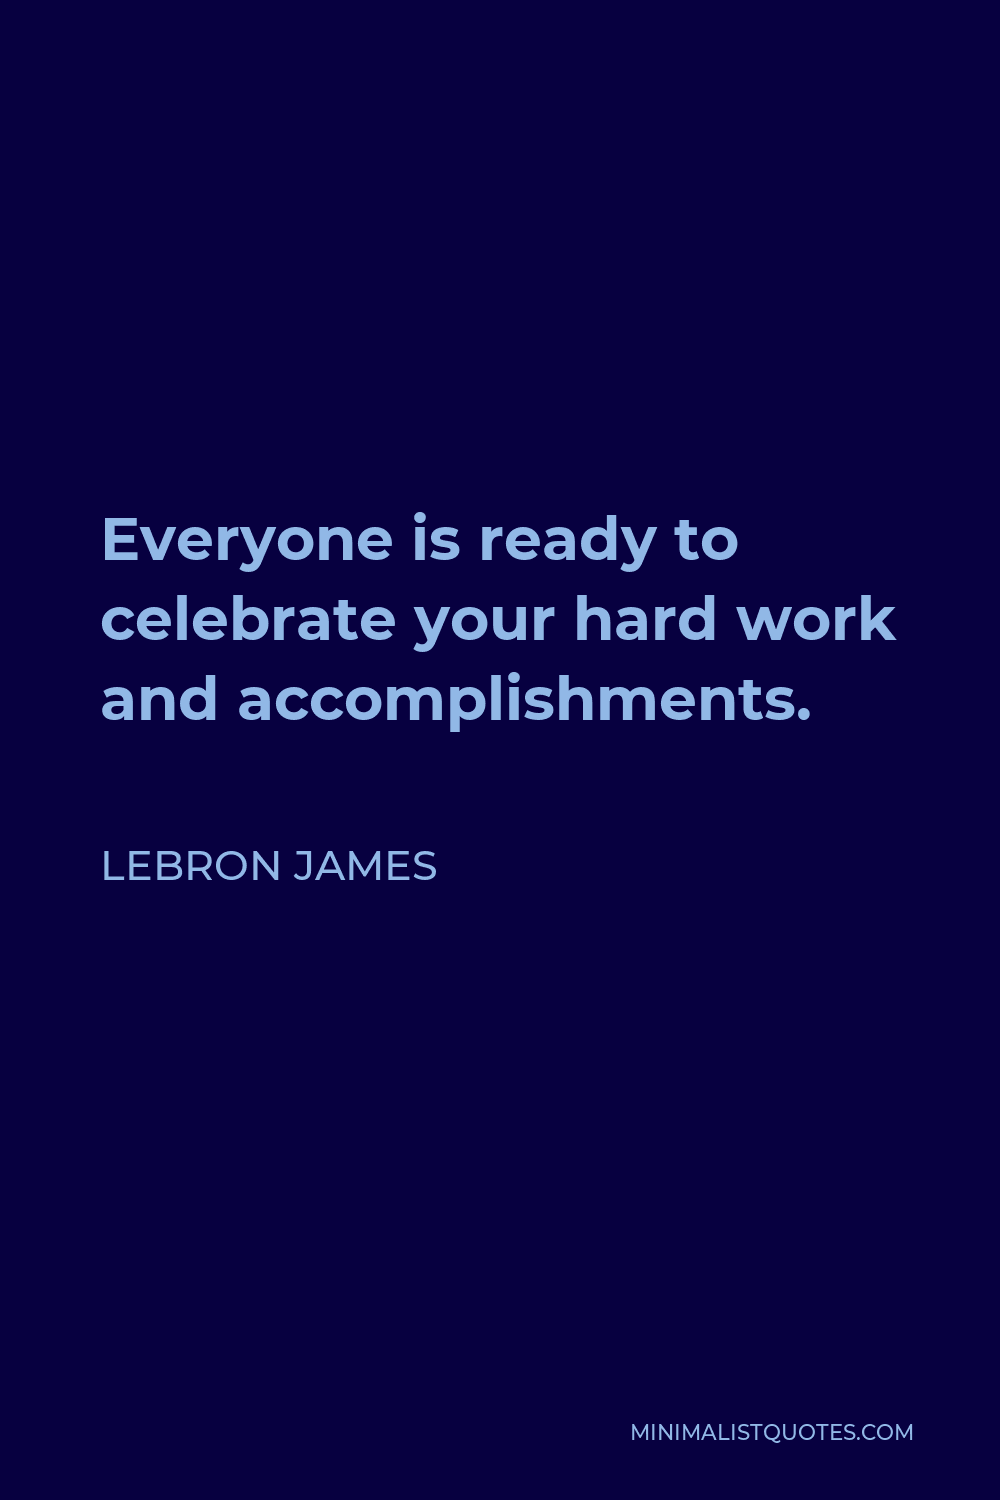 LeBron James Quote - Everyone is ready to celebrate your hard work and accomplishments.